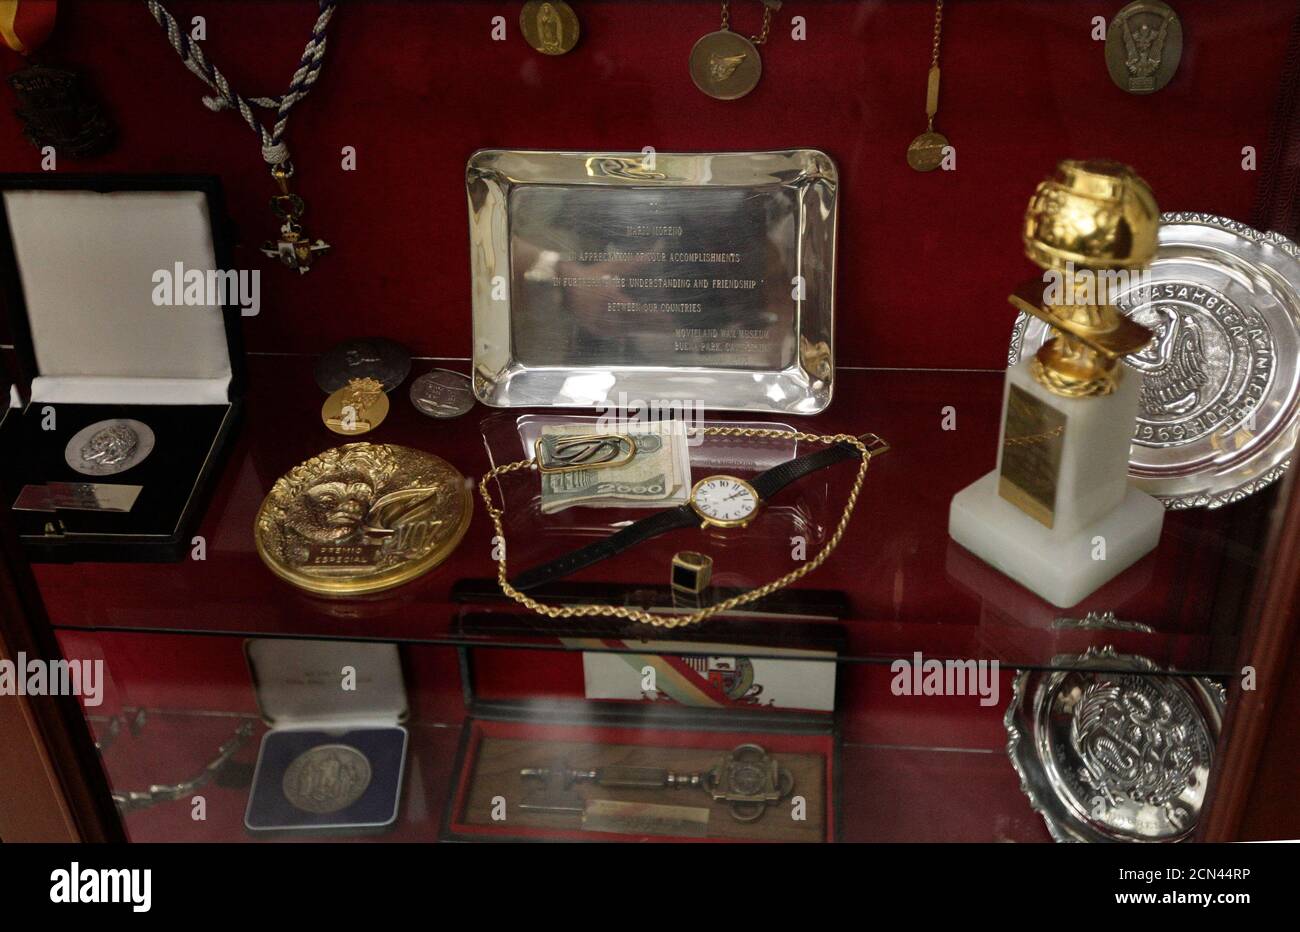 Medals, awards and other belongings of Mexican legendary comedian actor Mario Moreno 'Cantinflas' are seen in a glass cabinet at the Mario Moreno Foundation in Mexico City August 8, 2011. Mexico will celebrate the birthday of Cantinflas, who would have been 100 years old on August 12, with exhibitions of photographs and screenings of some of his most celebrated movies along the capital. Picture taken August 8, 2011. REUTERS/Henry Romero (MEXICO - Tags: ENTERTAINMENT SOCIETY ANNIVERSARY) Stock Photo